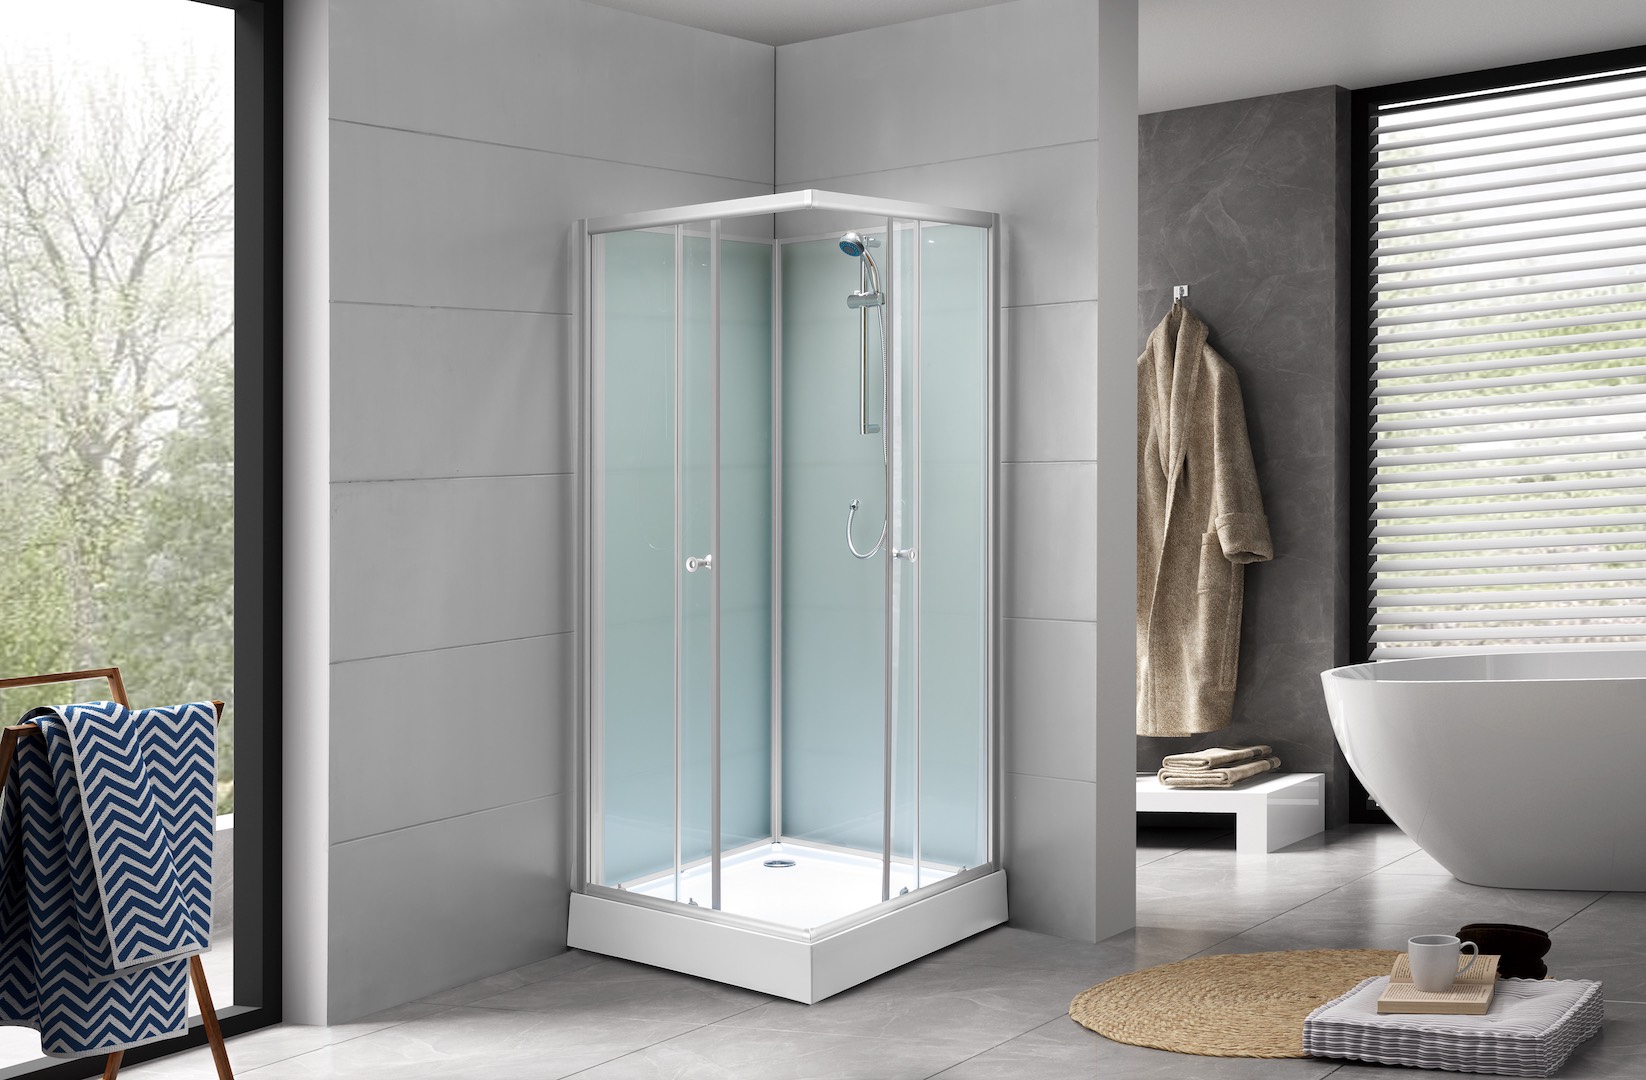 Detroit 80 Low Shower Cabin for Small Bathrooms - Bath Deluxe Bathrooms